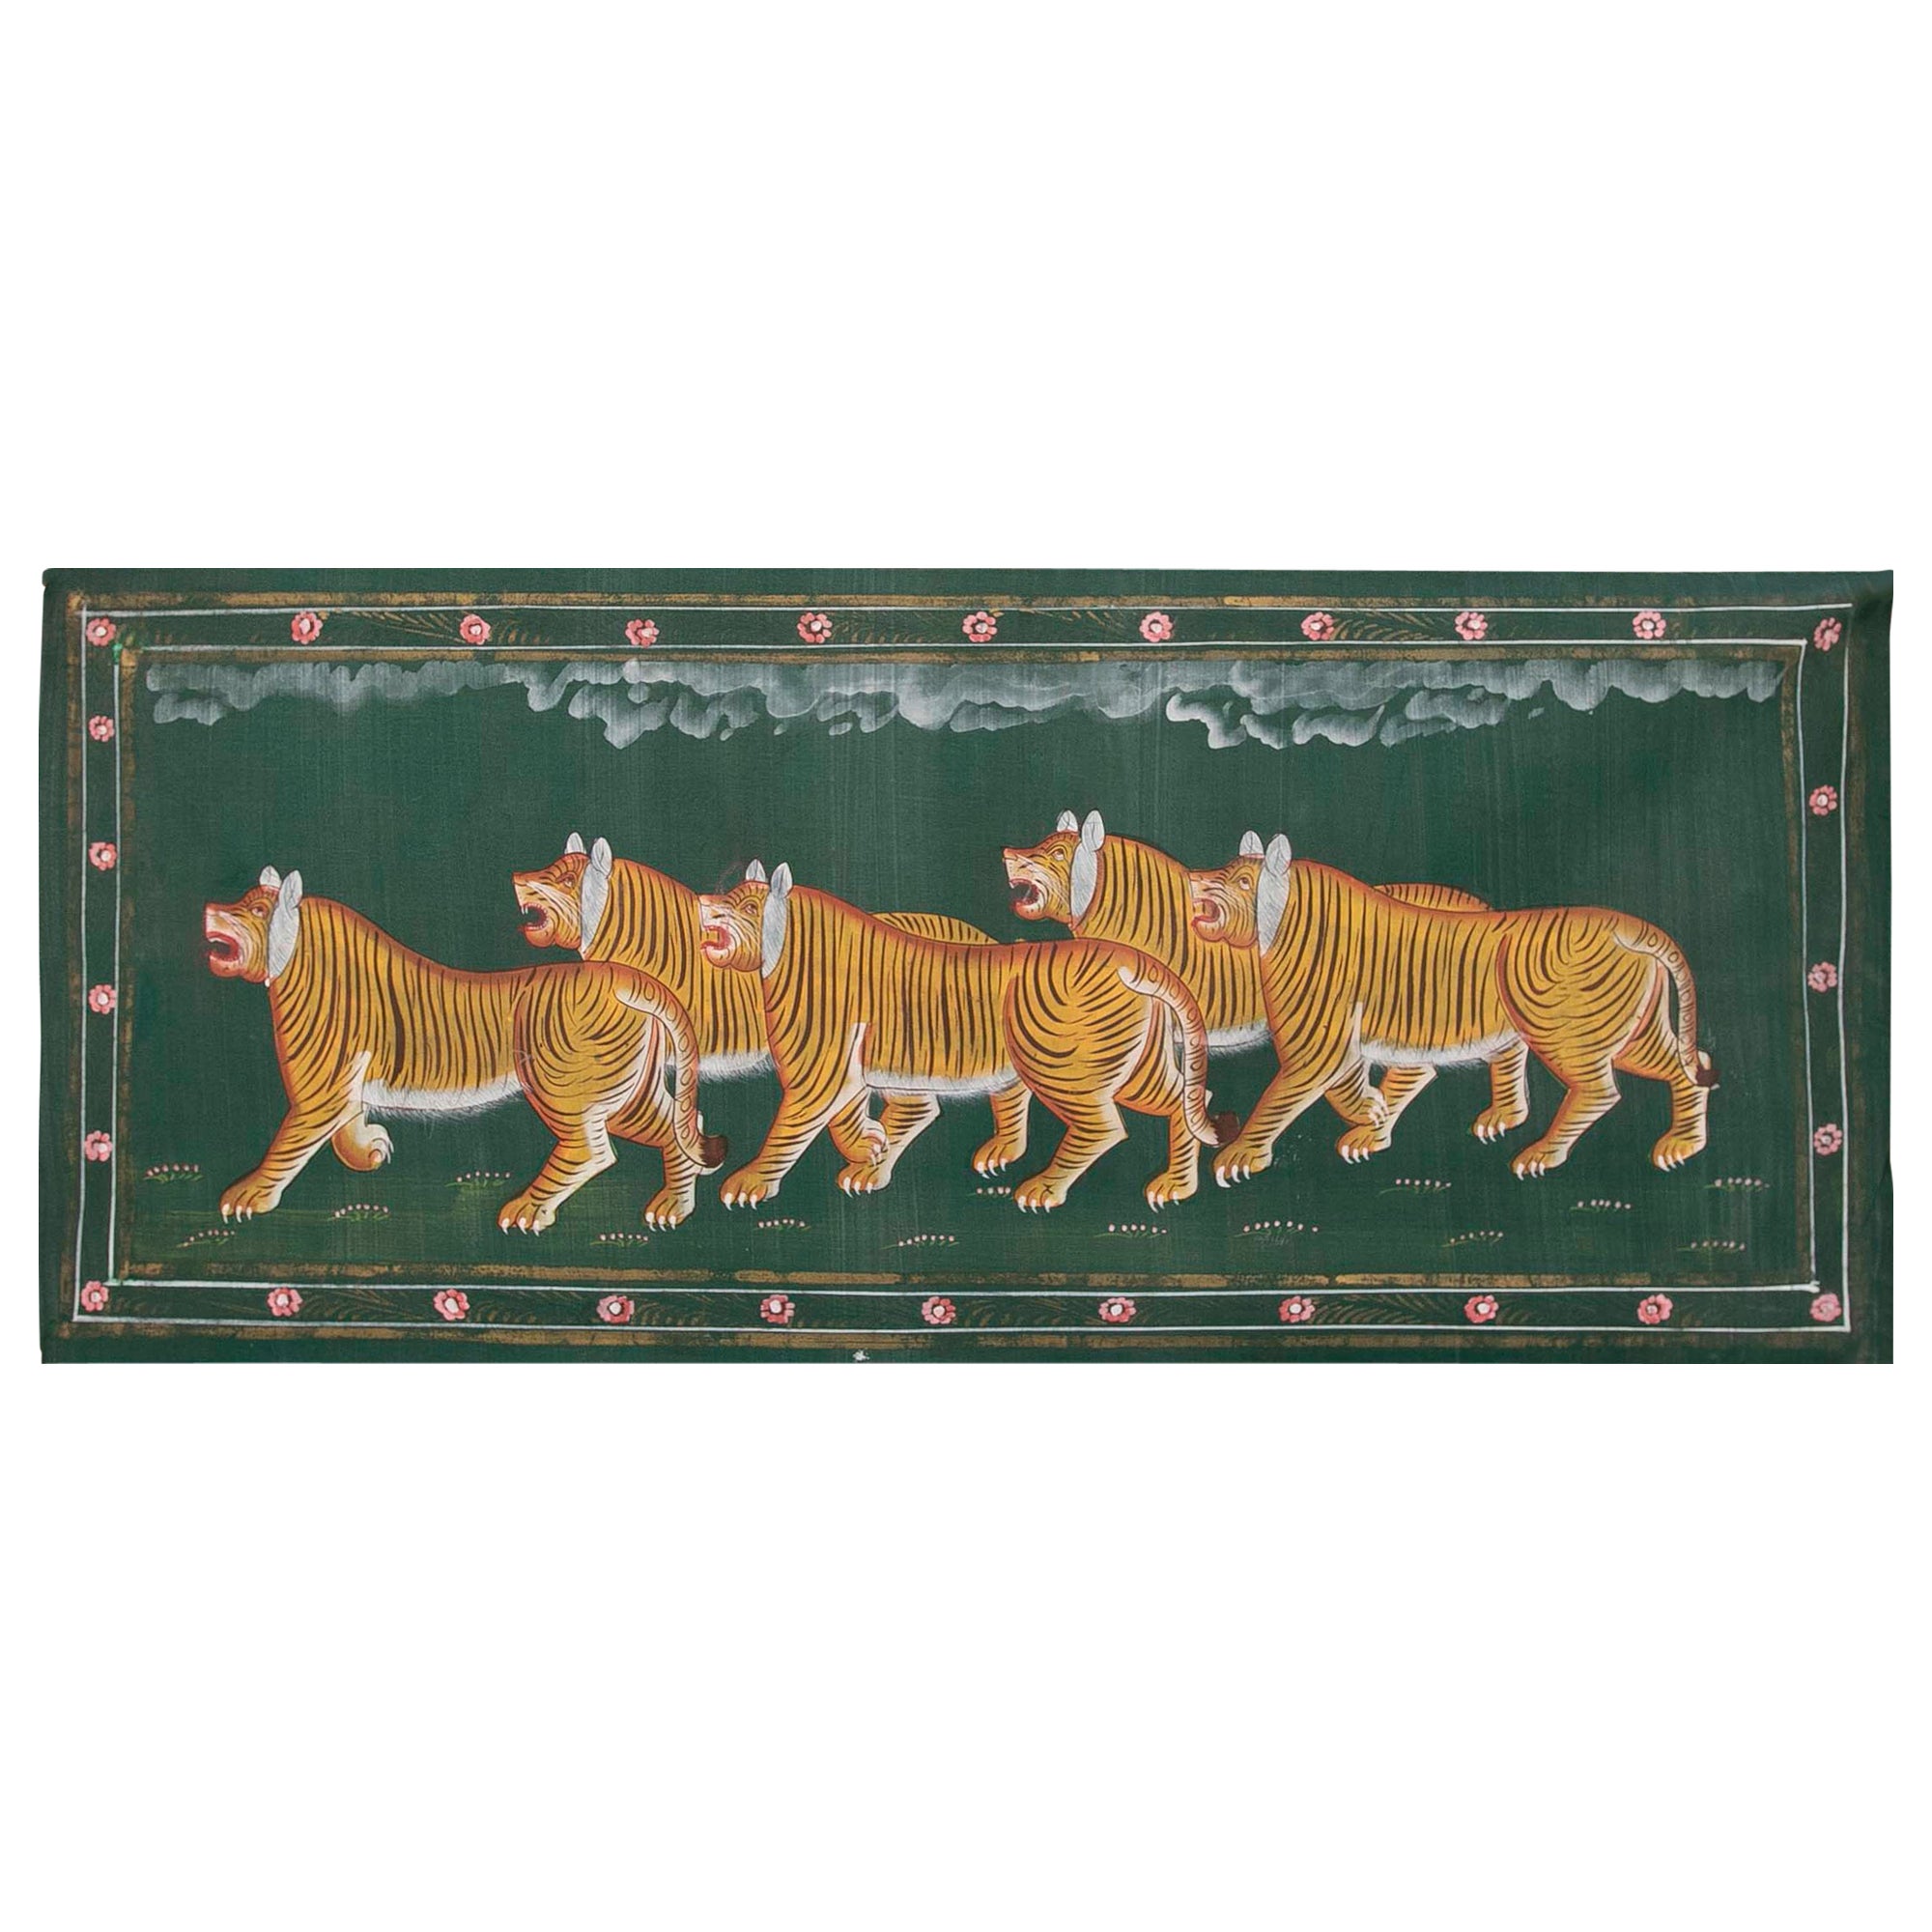 1970s Jaime Parlade Designer Hand Painting "Tigers" Oil on Canvas